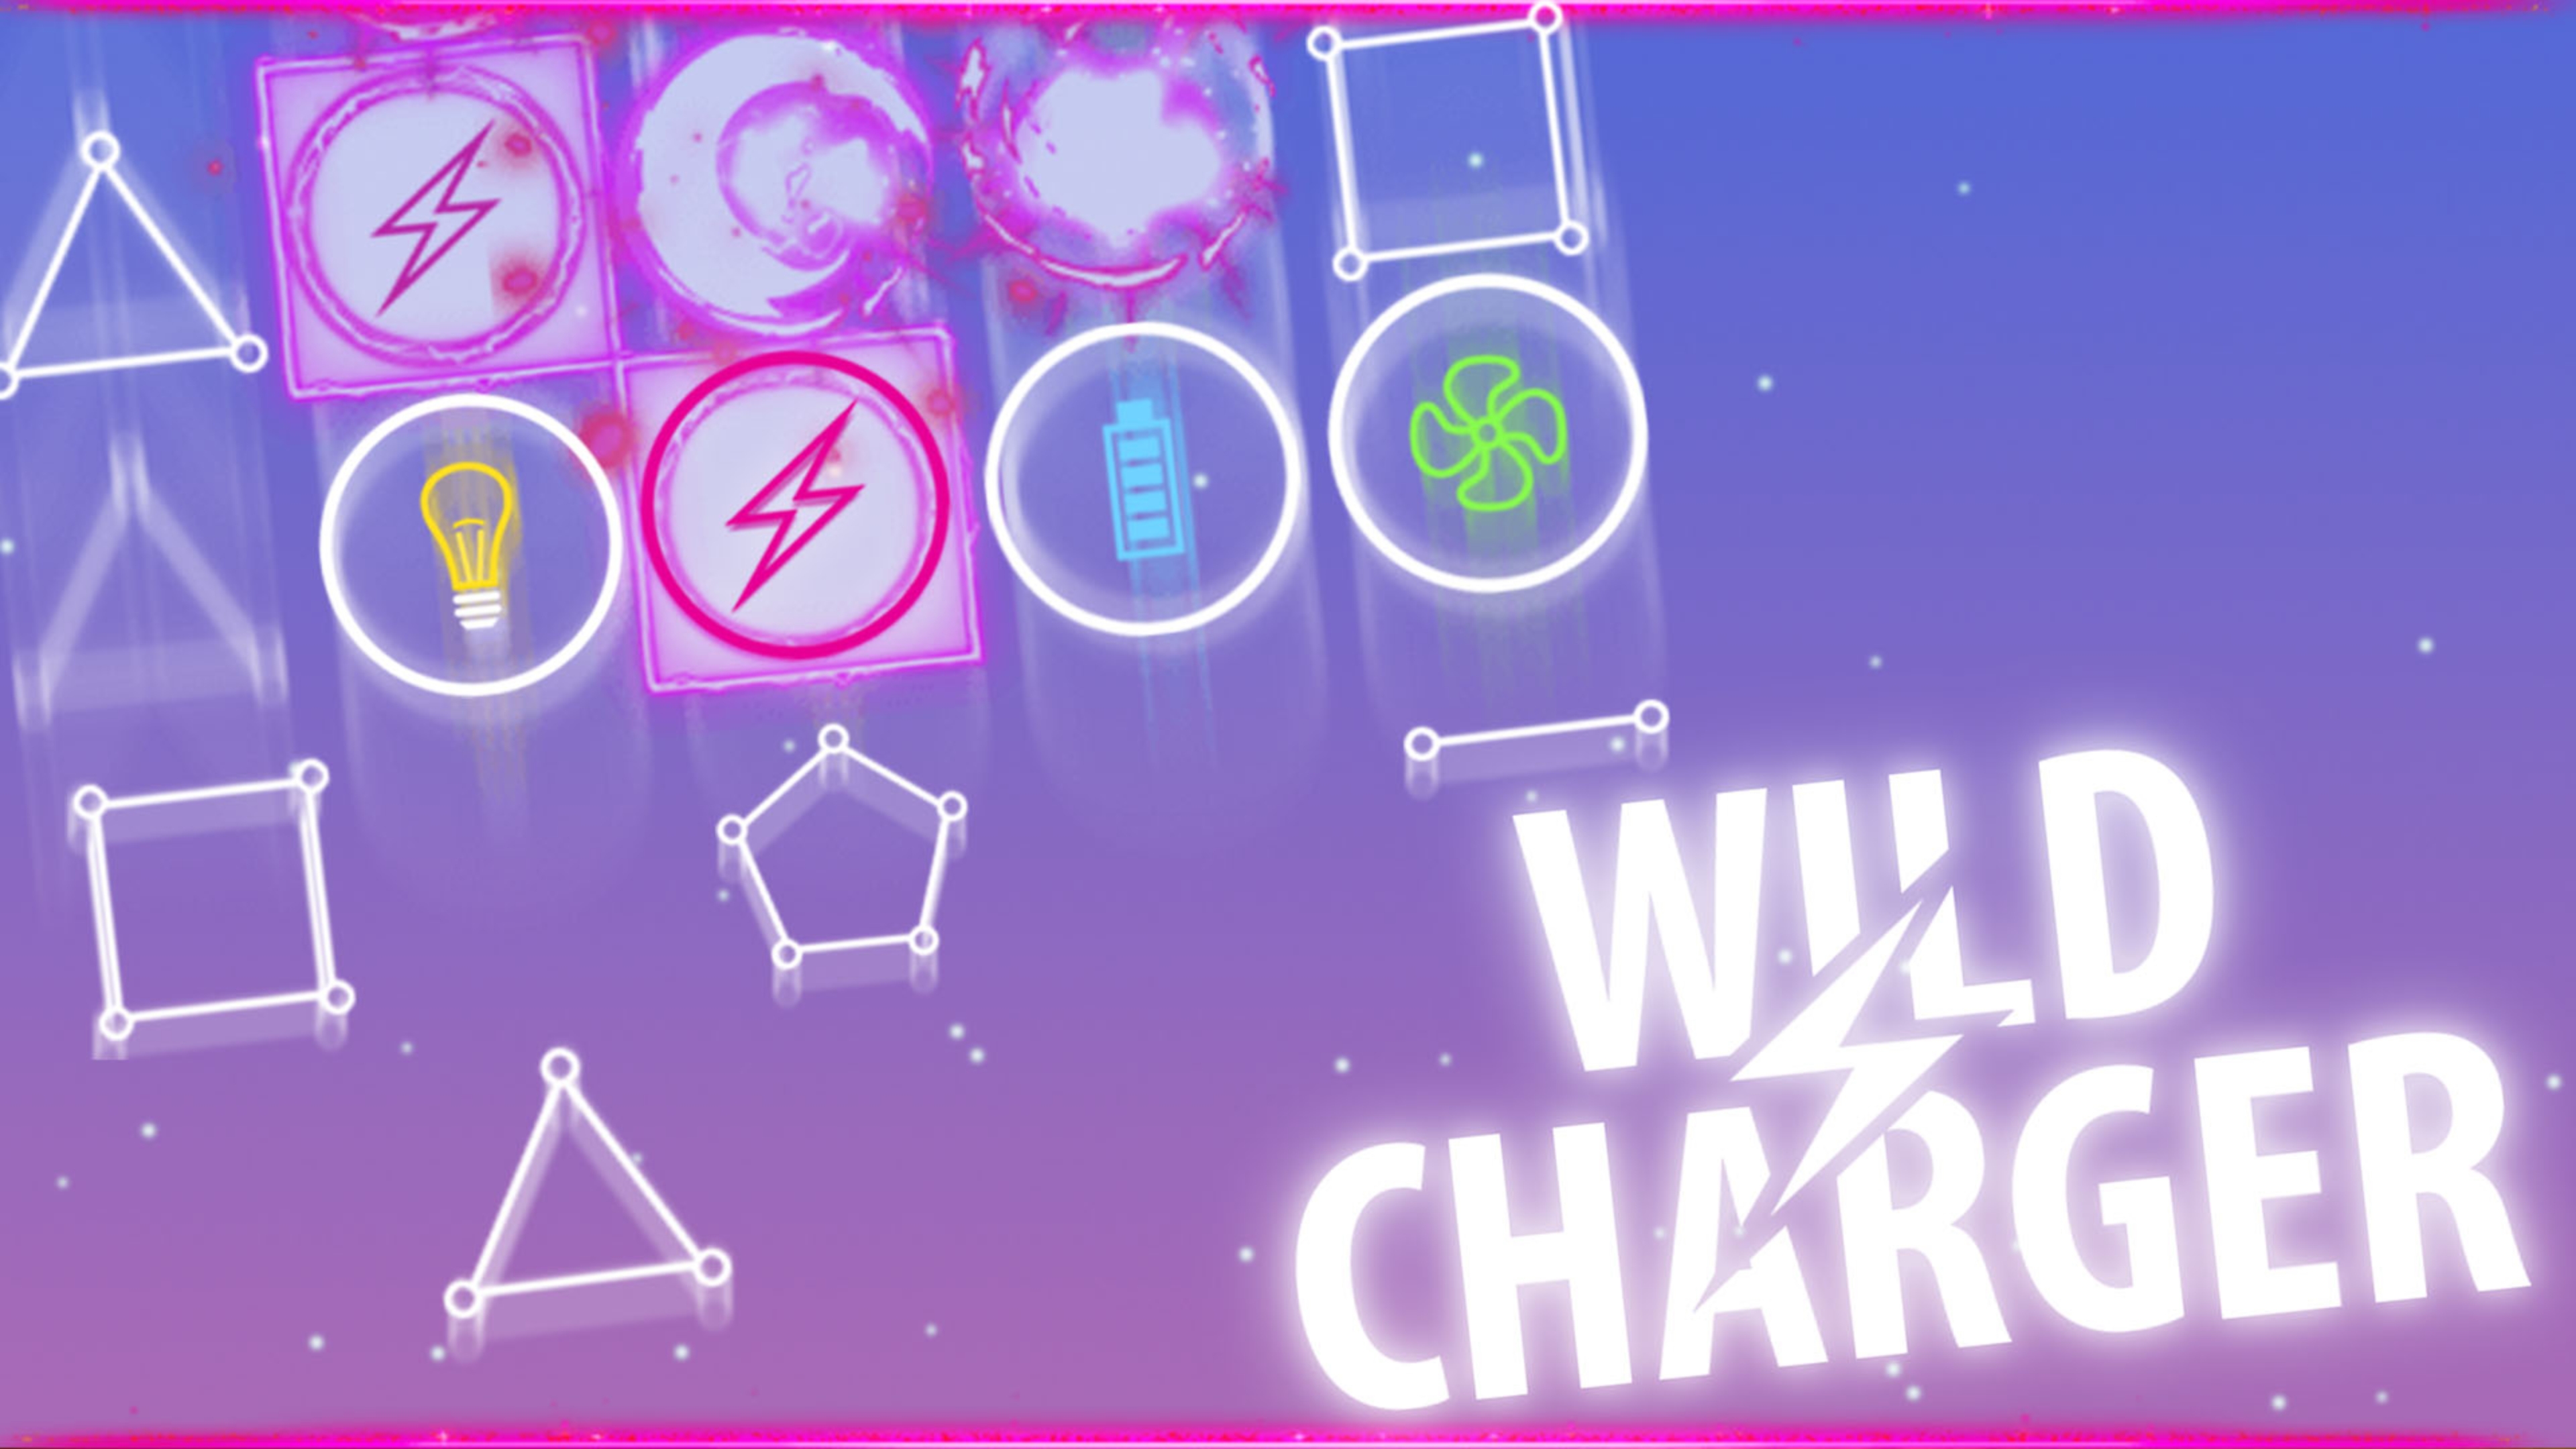 The Wild Charger Online Slot Demo Game by ZEUS PLAY